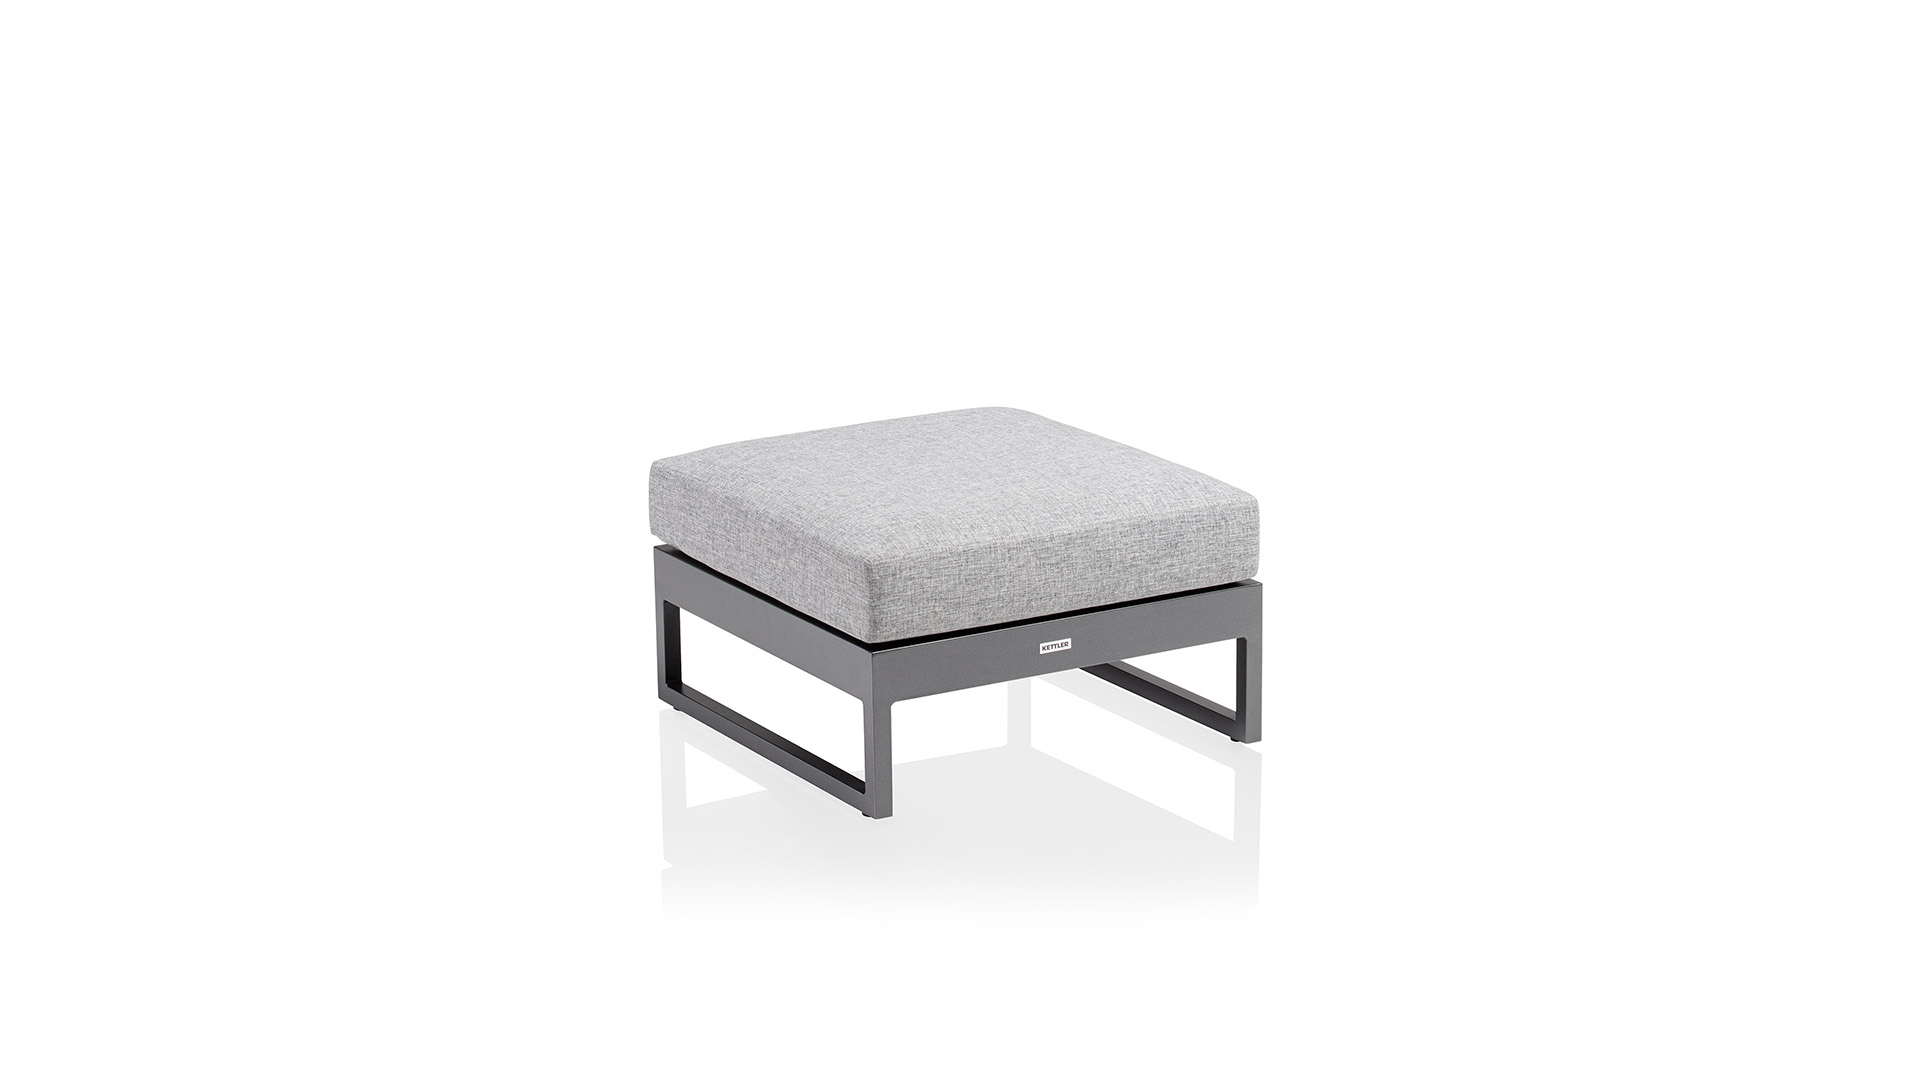 Stool incl. cushion, anthracite, cushion light gre